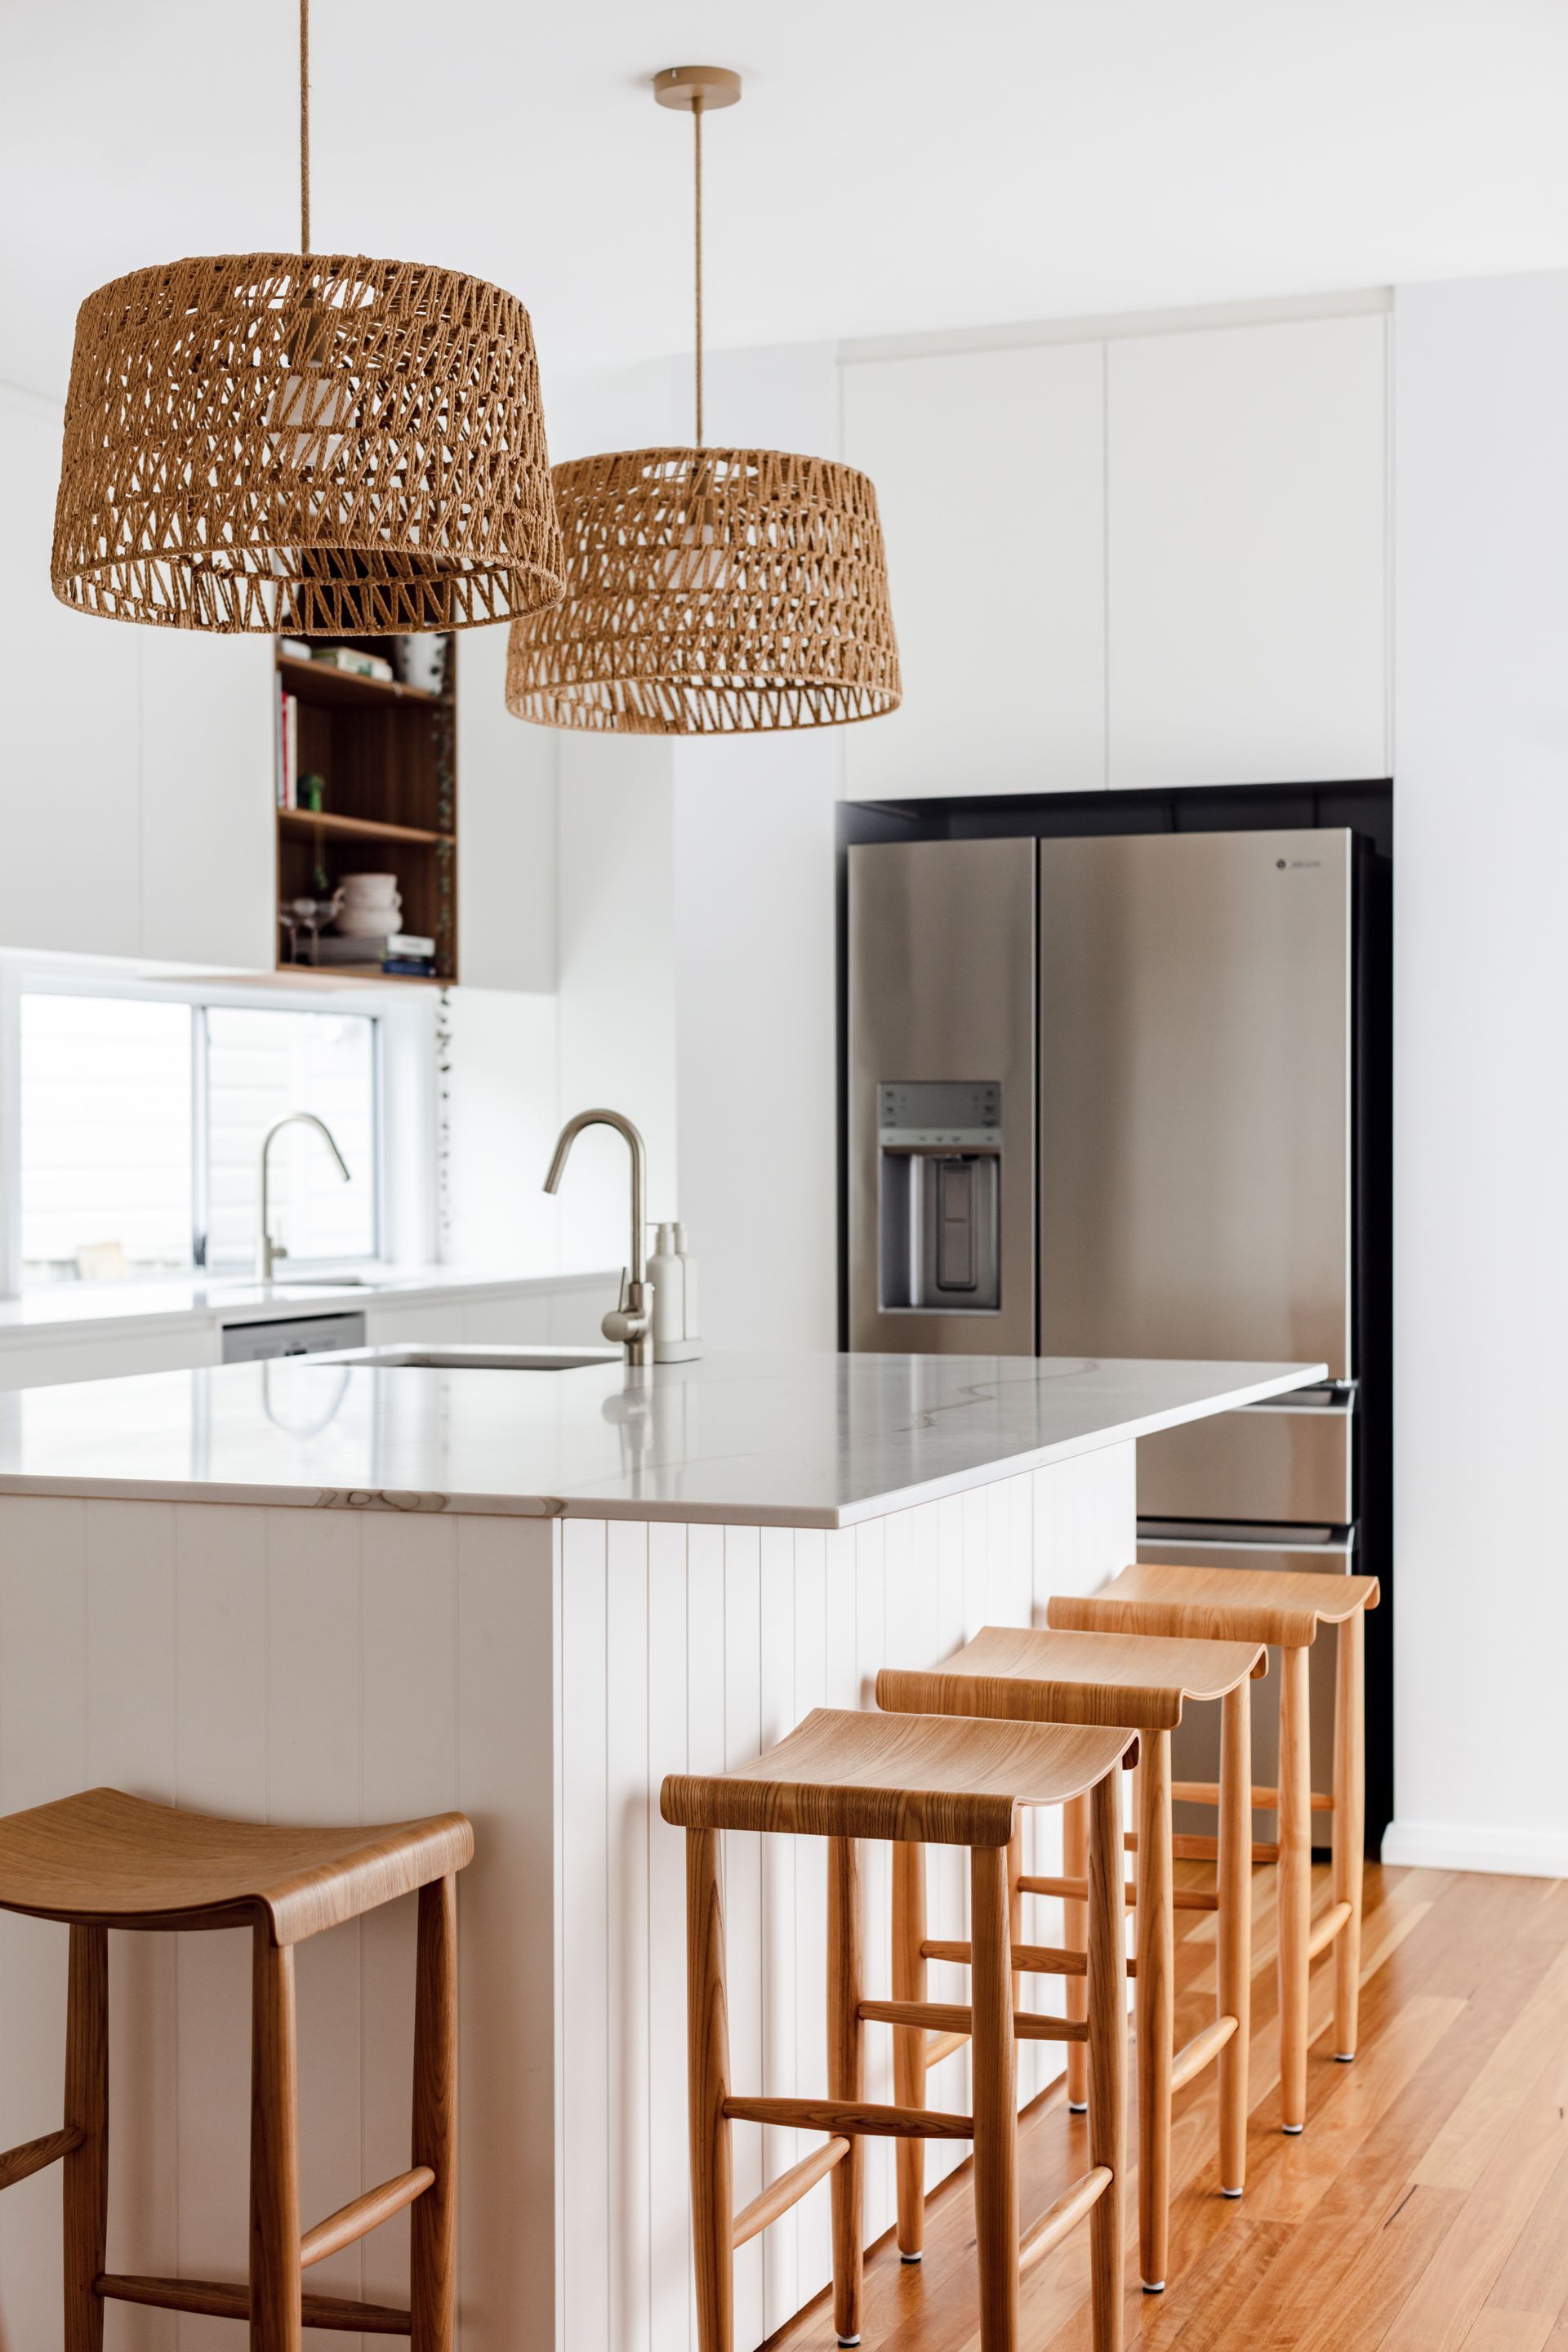 White kitchen modern — Contact PK4 Joinery in Port Macquarie, NSW